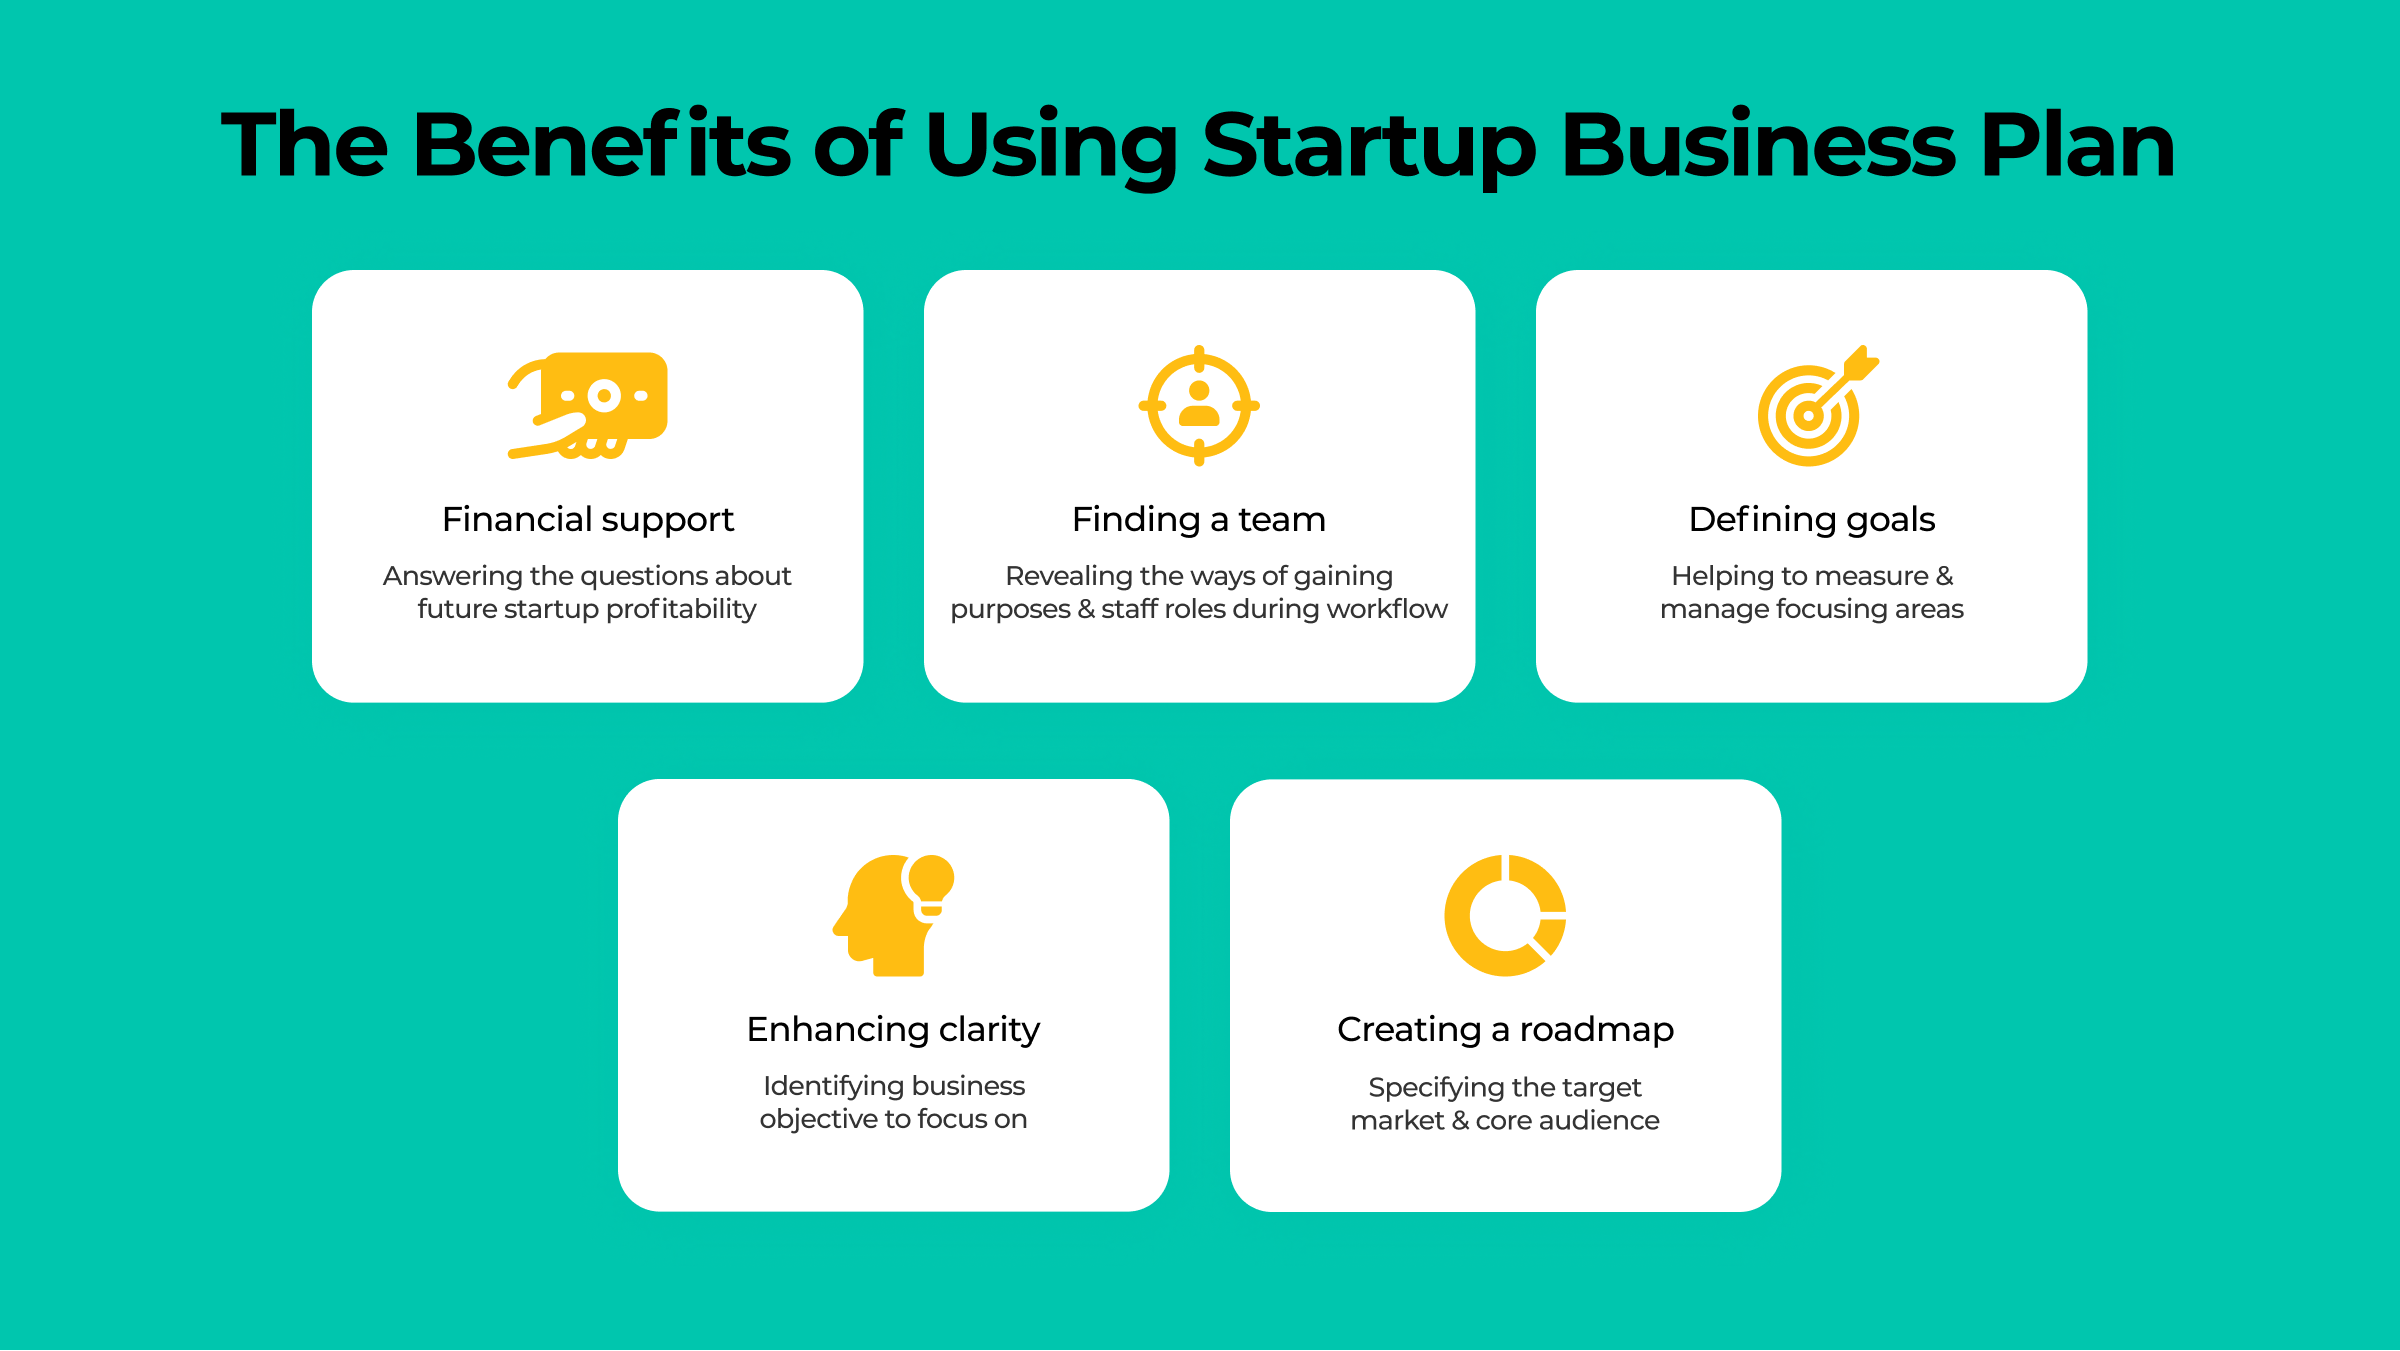 The Benefits of Using Startup Business Plan